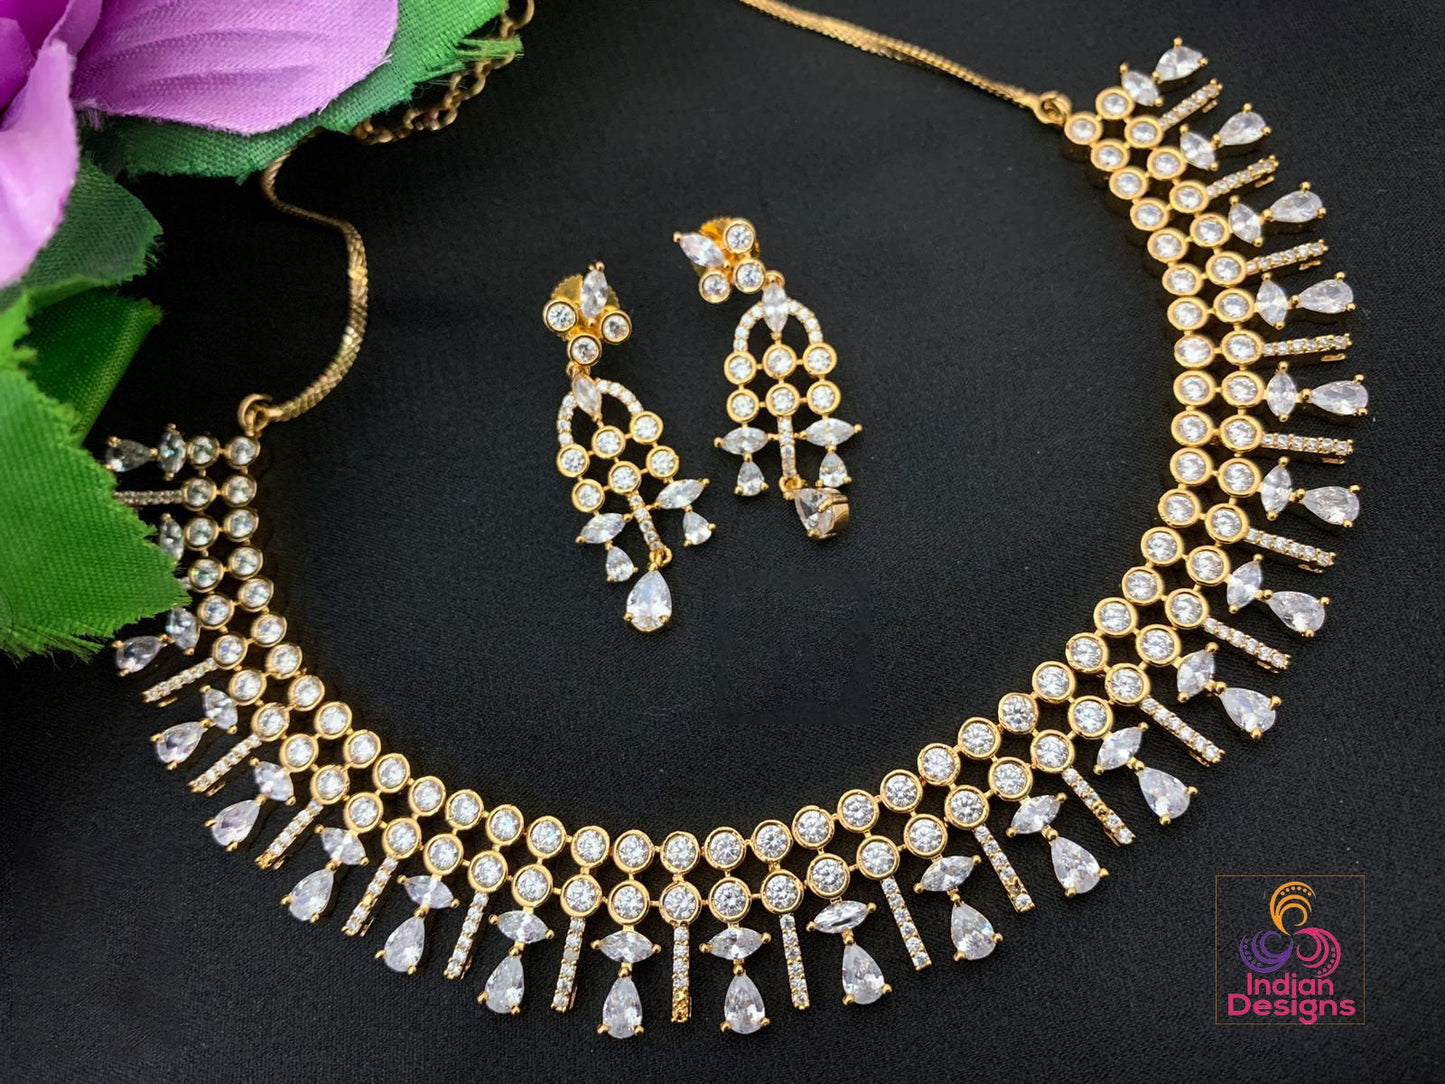 Gold-plated Pink American diamond necklace jewelry | Rose quartz crystal necklace | statement necklace and earring set | Indian Designs